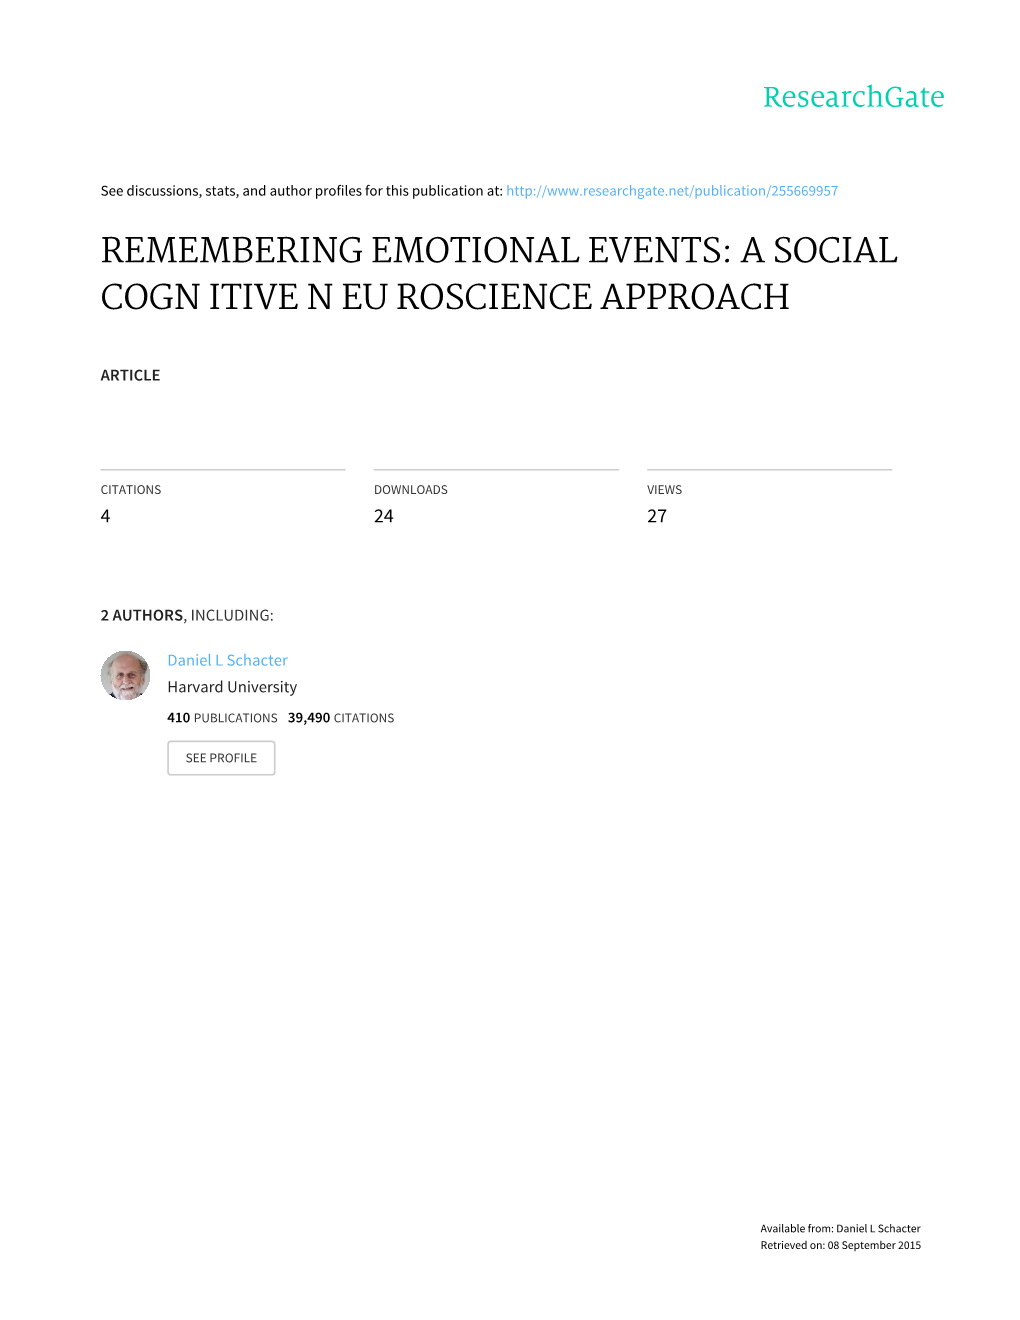 Remembering Emotional Events: a Social Cogn Itive N Eu Roscience Approach